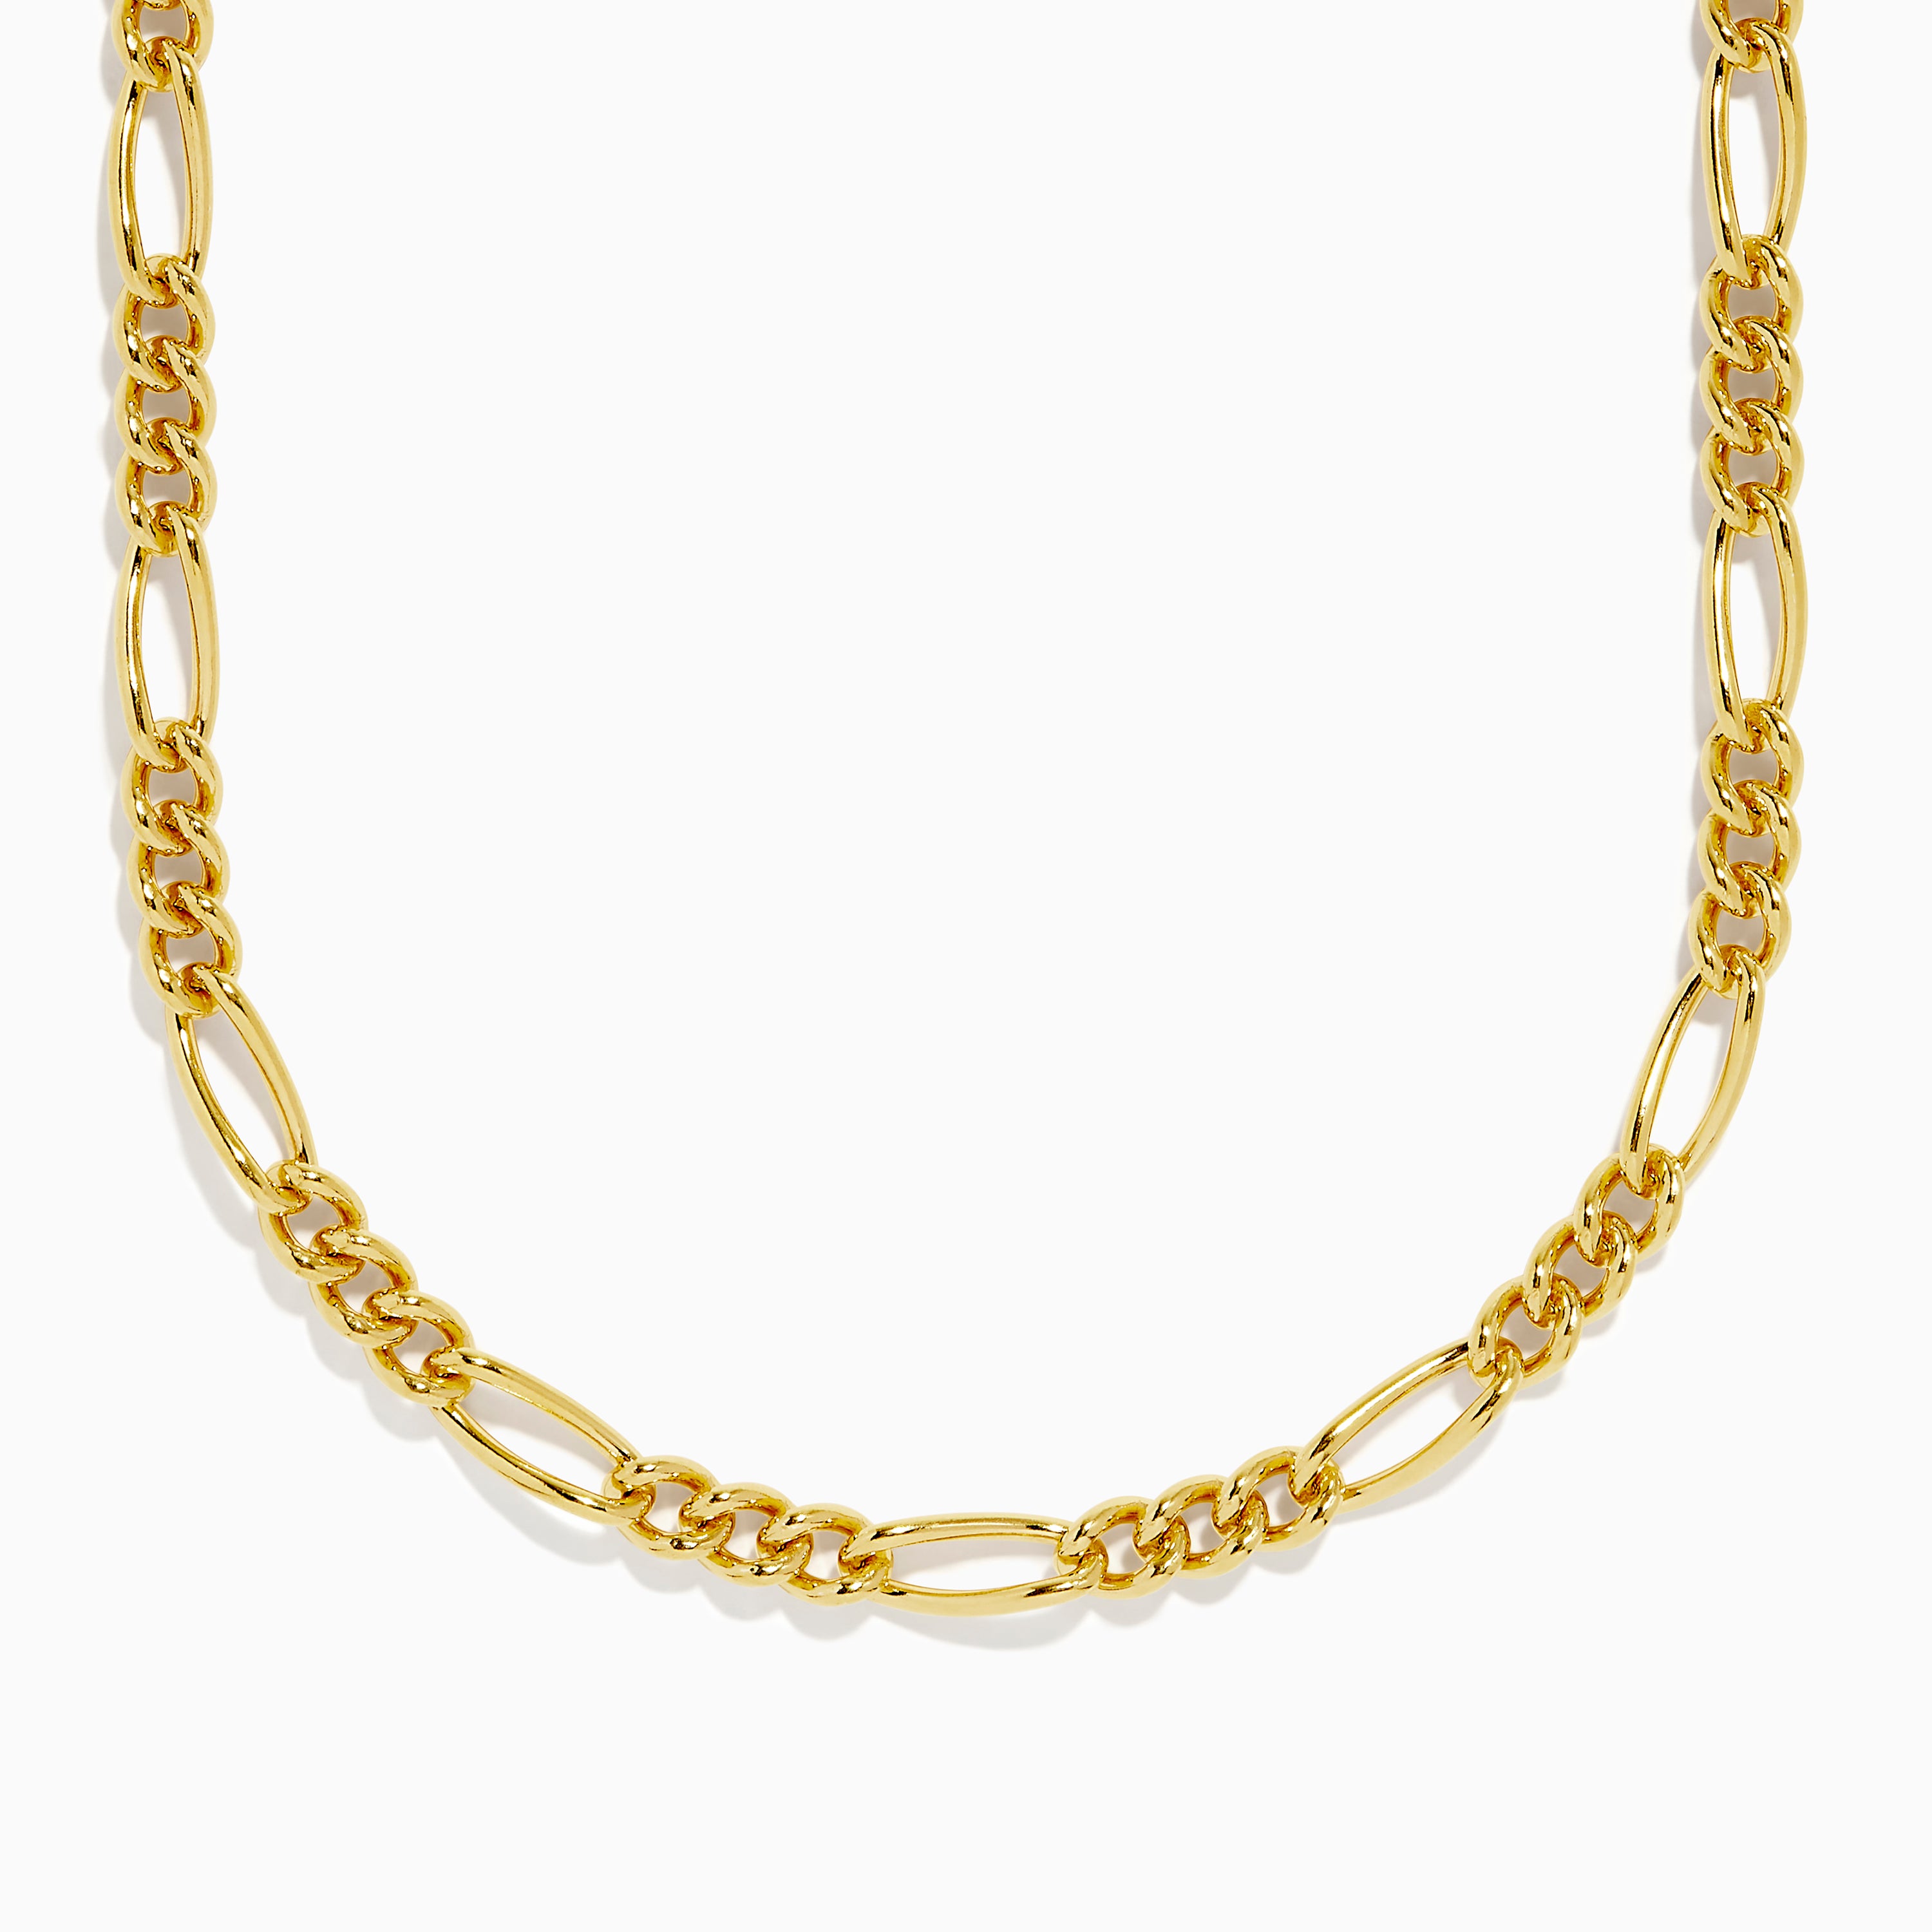 Buy Traditional daily wear gold chain design for men and women